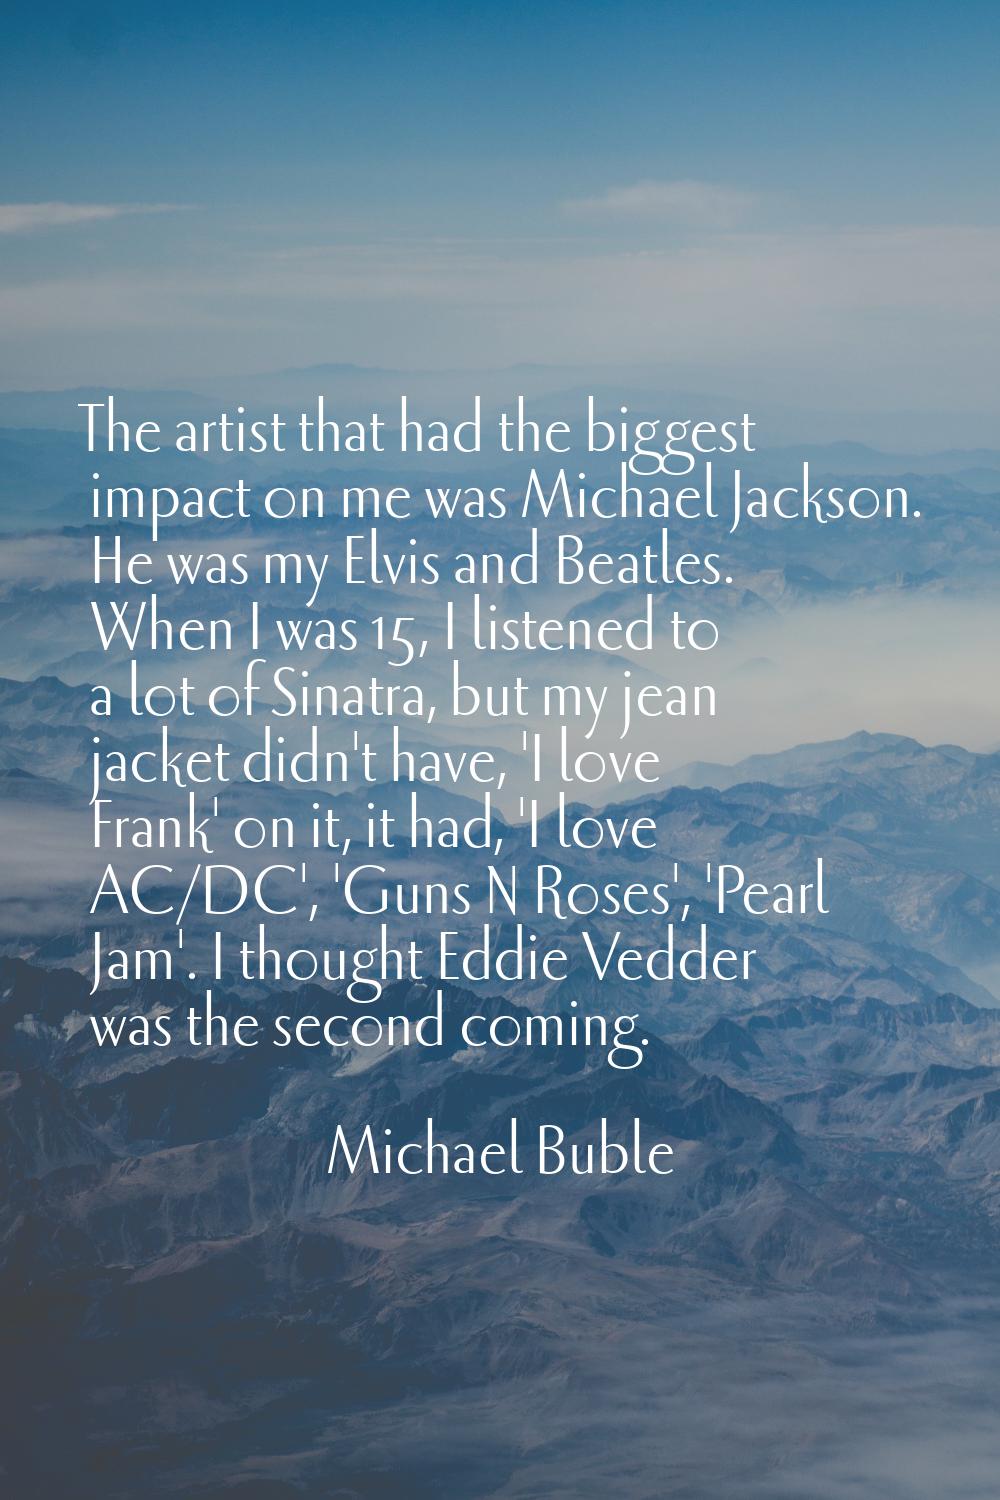 The artist that had the biggest impact on me was Michael Jackson. He was my Elvis and Beatles. When